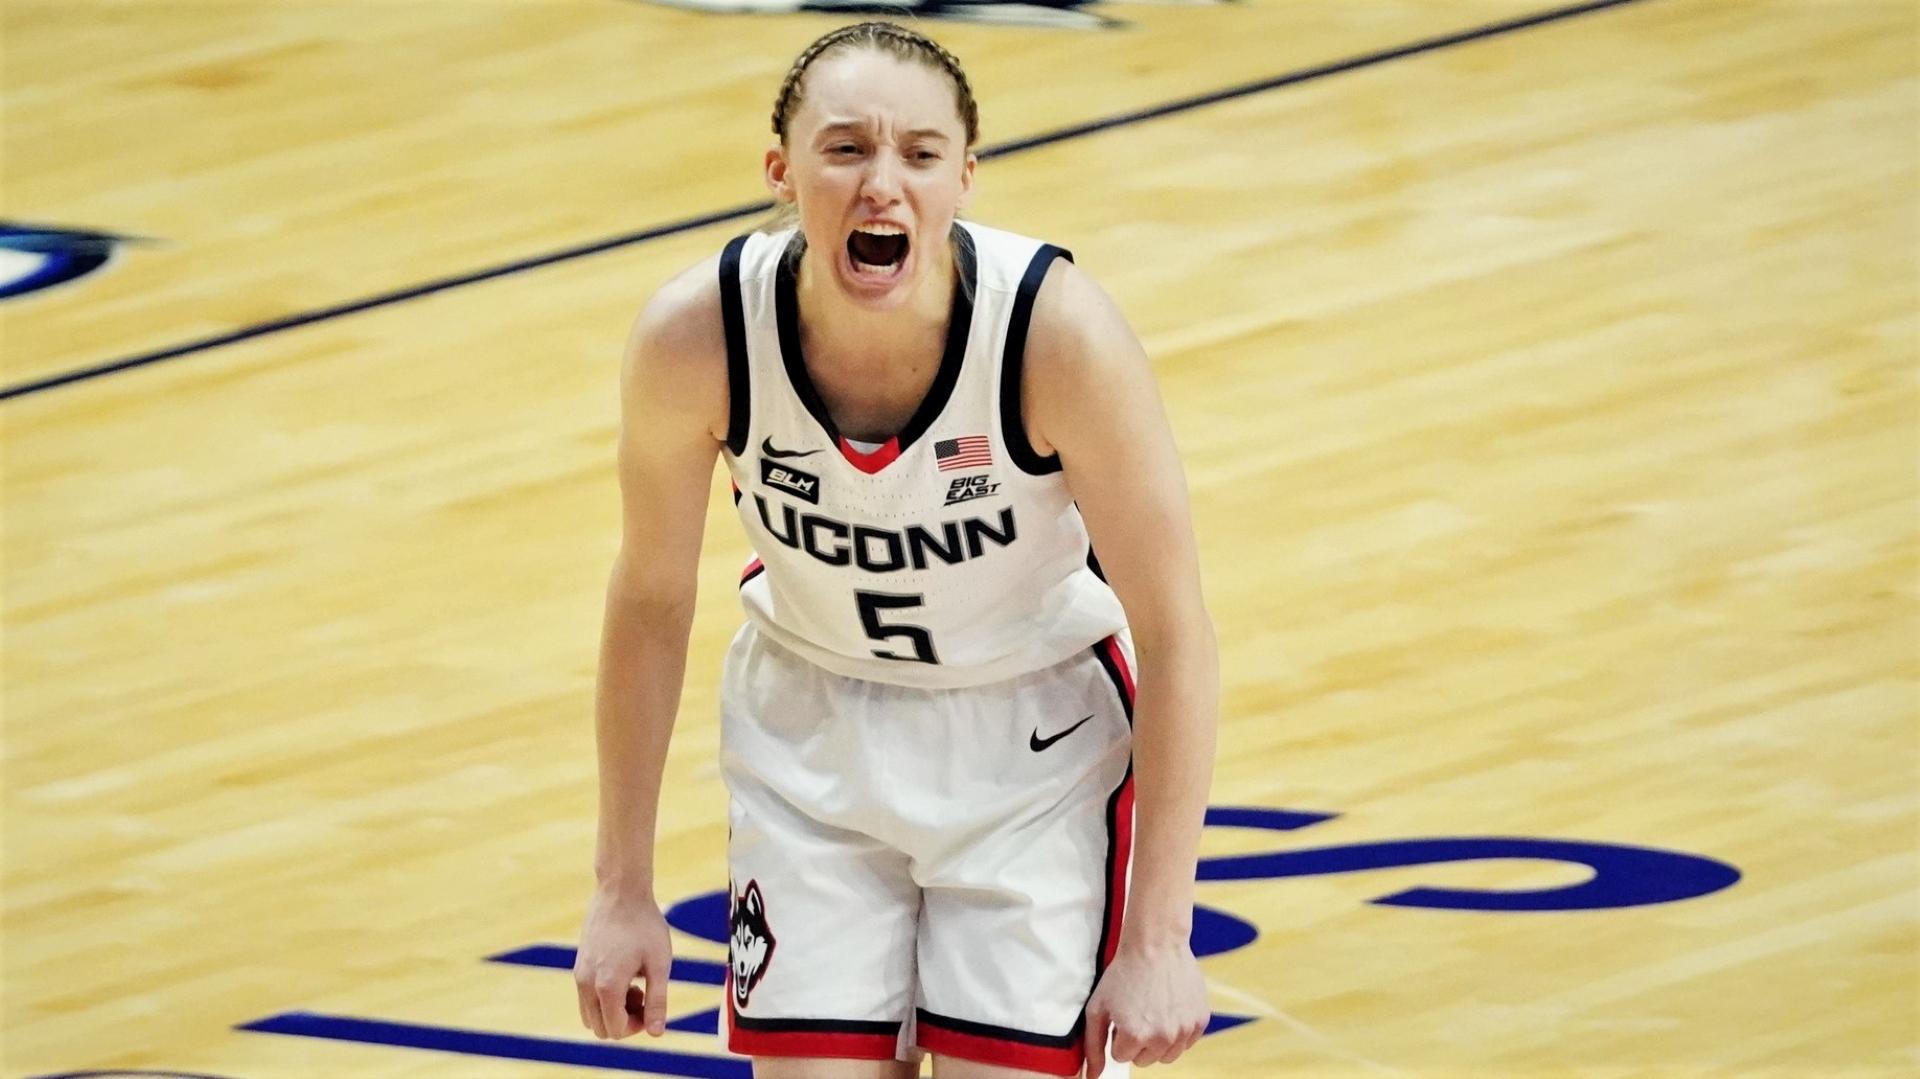 Mar 8, 2021; Uncasville, Connecticut, USA; UConn Huskies guard Paige Bueckers (5) reacts after a basket against the Marquette Golden Eagles in the first half at Mohegan Sun. / David Butler II-USA TODAY Sports